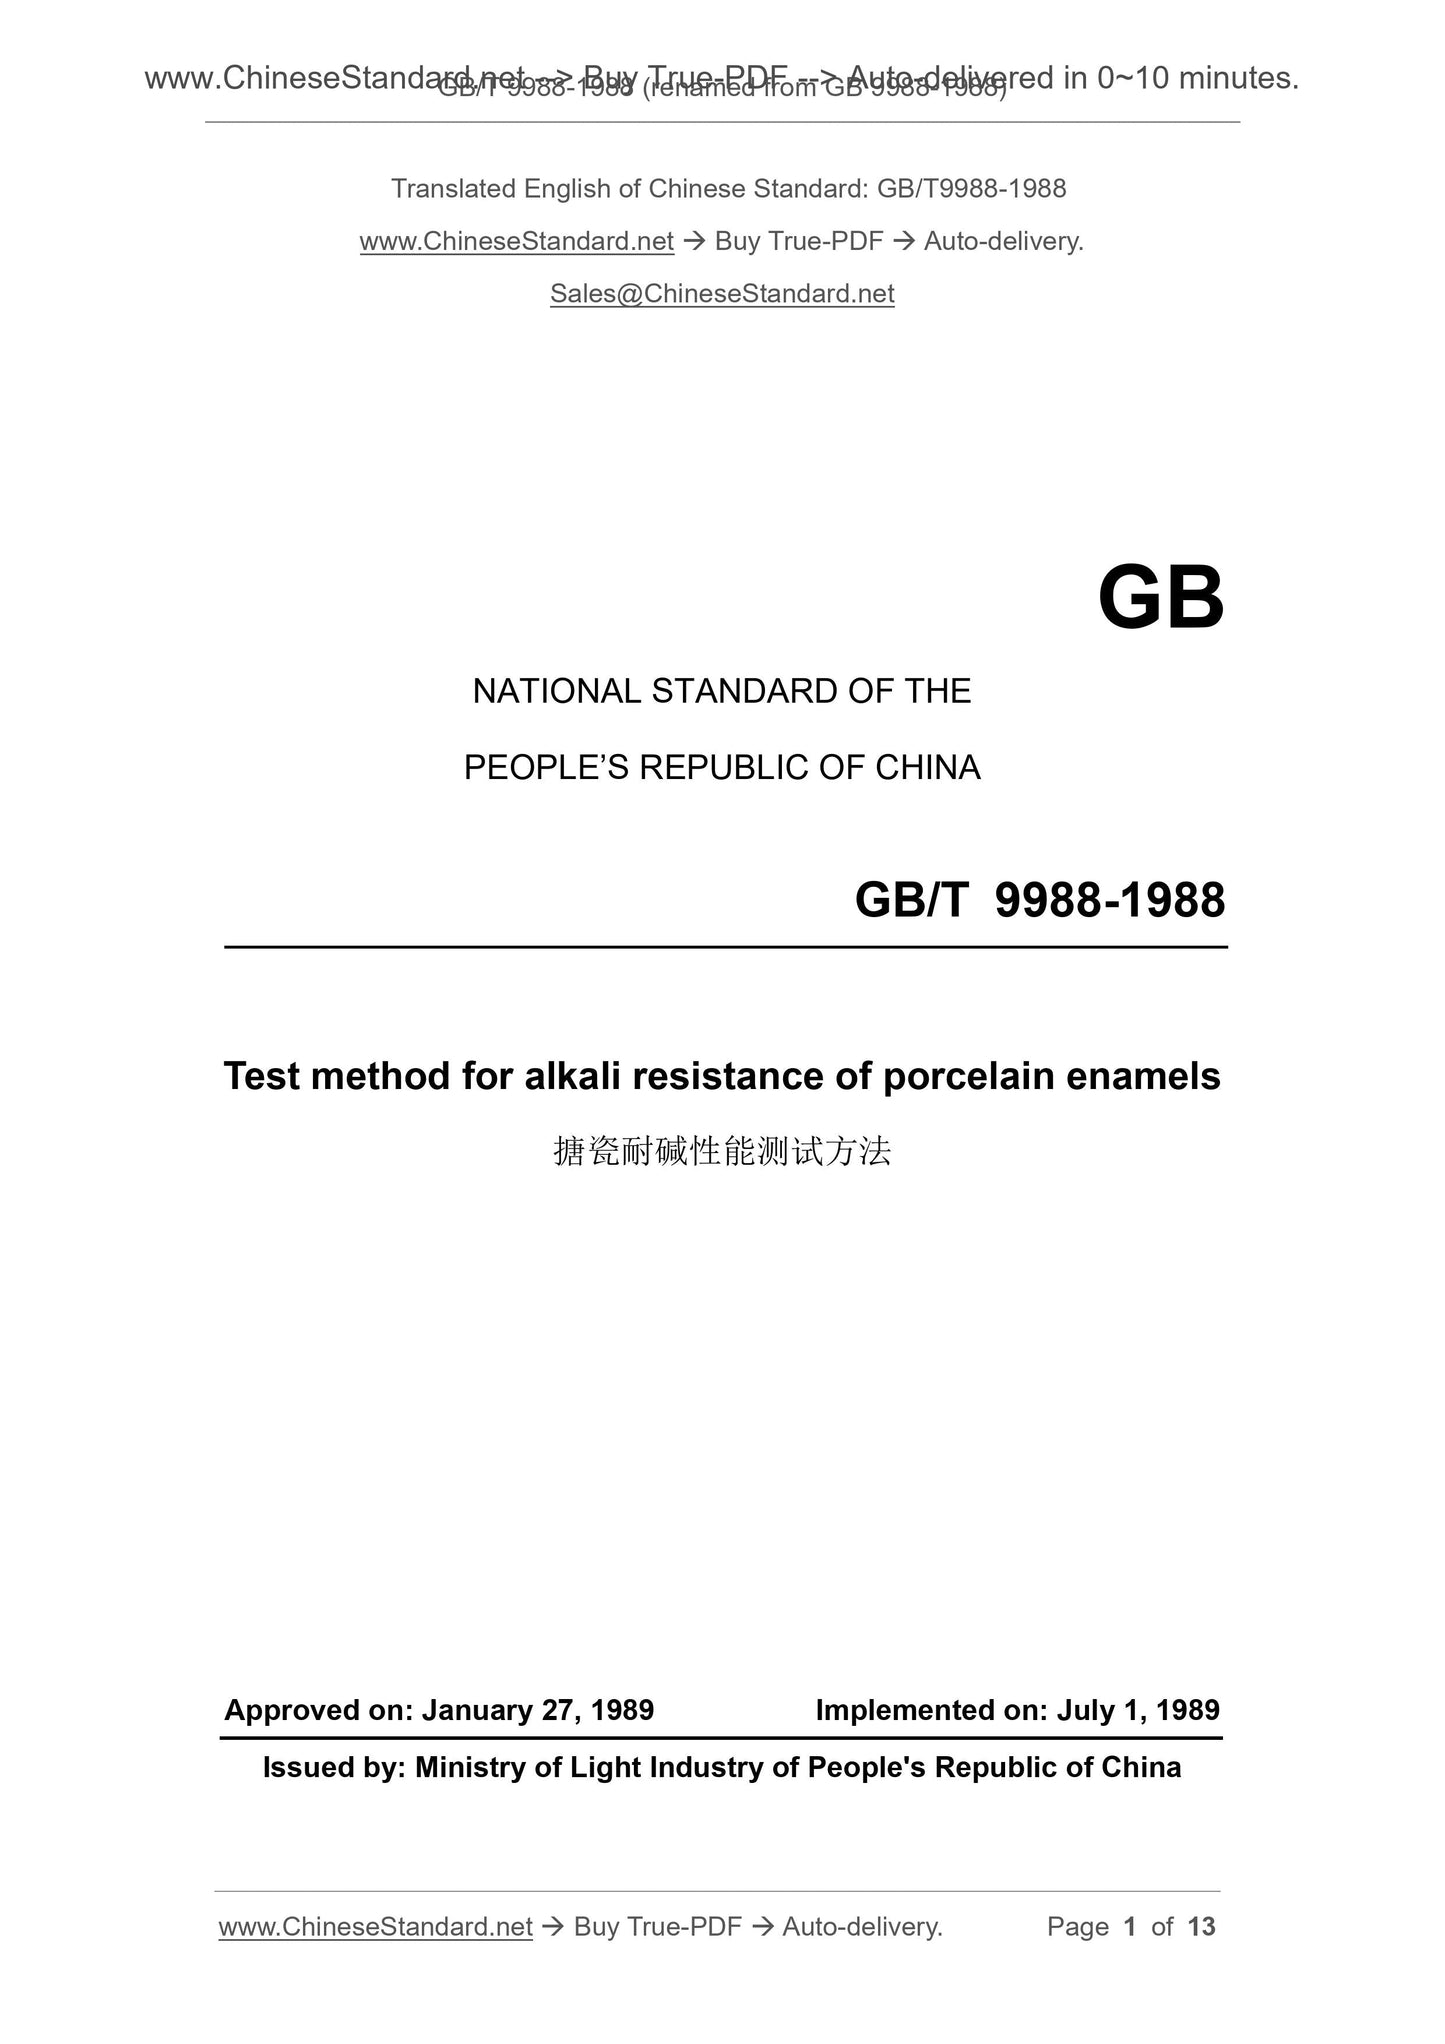 GB/T 9988-1988 Page 1